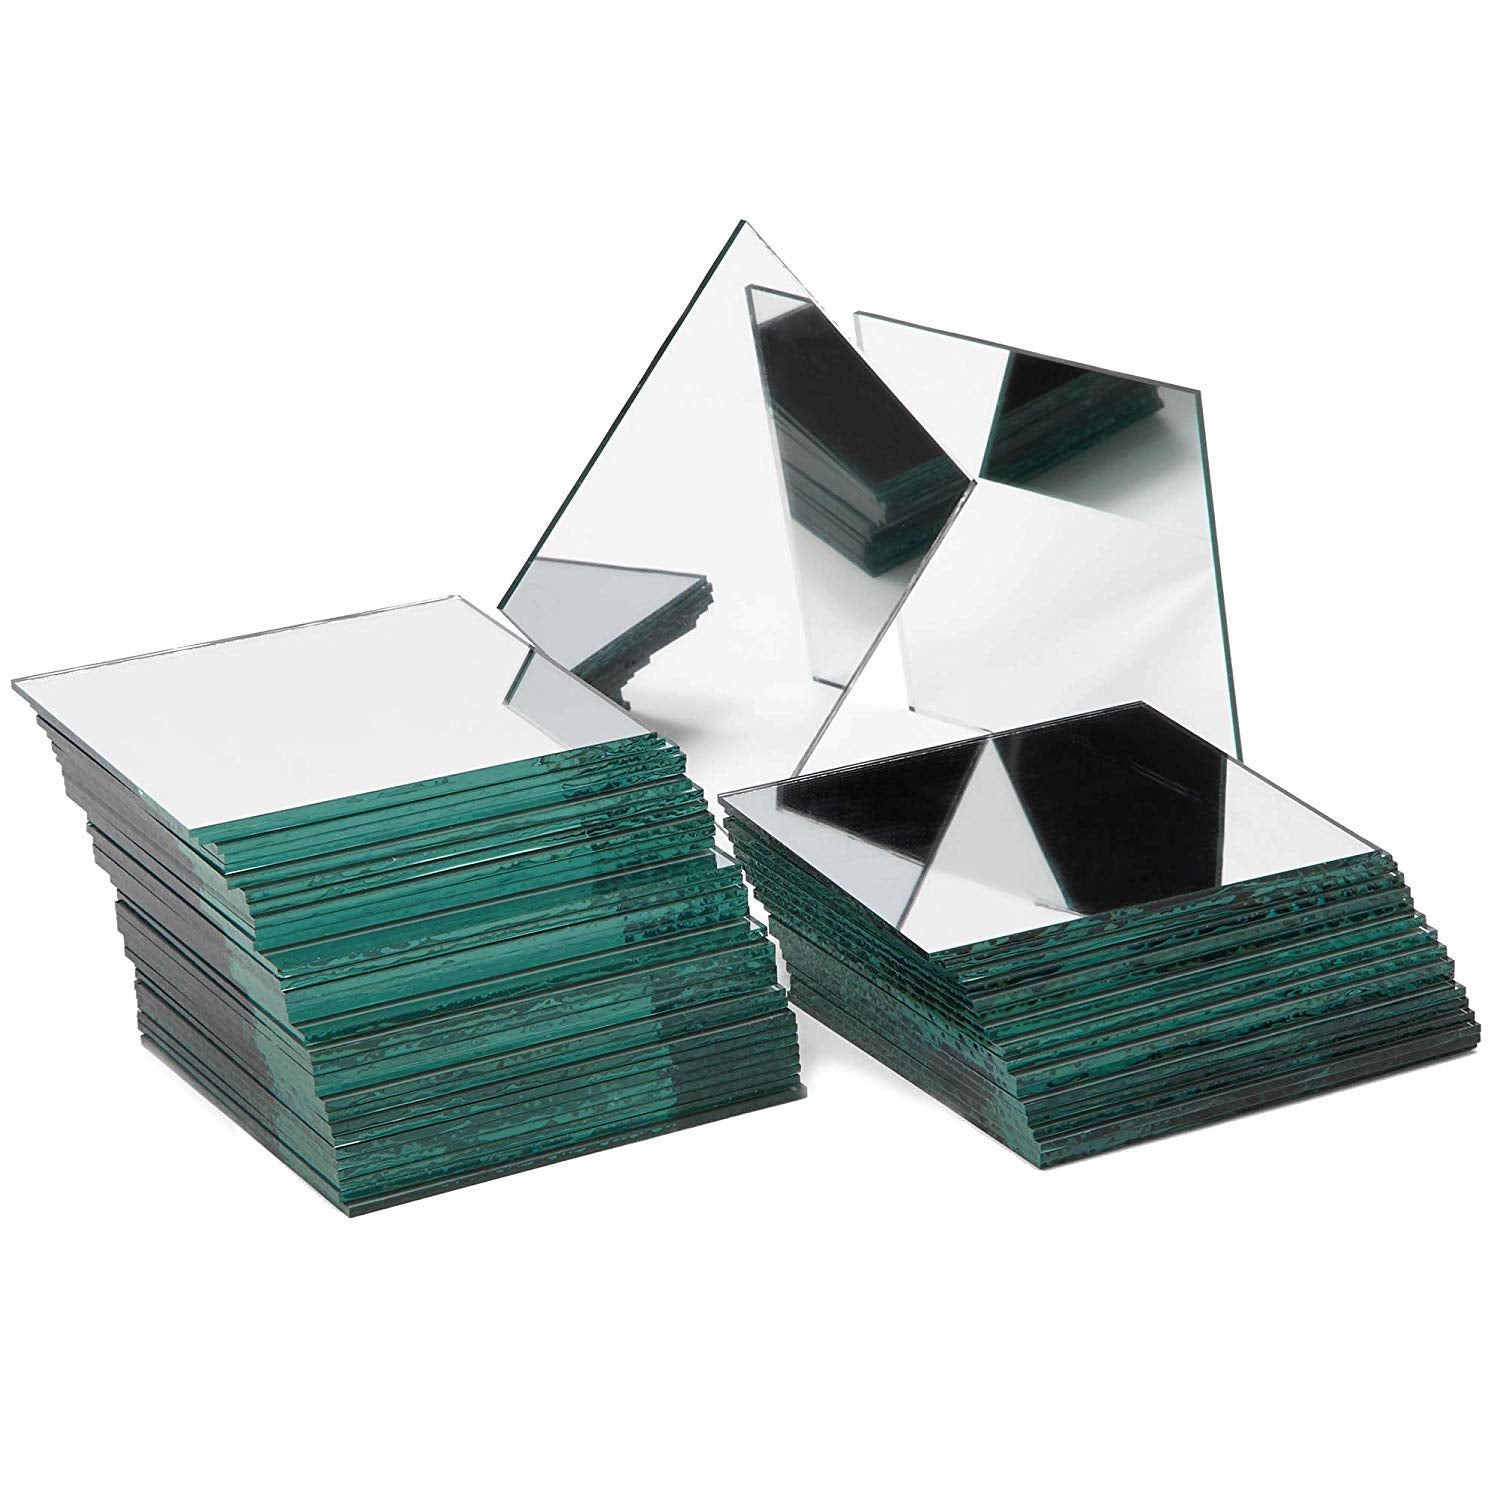 Square Mirror Tiles for Home Decor and DIY Crafts (3x3 Inches, 50